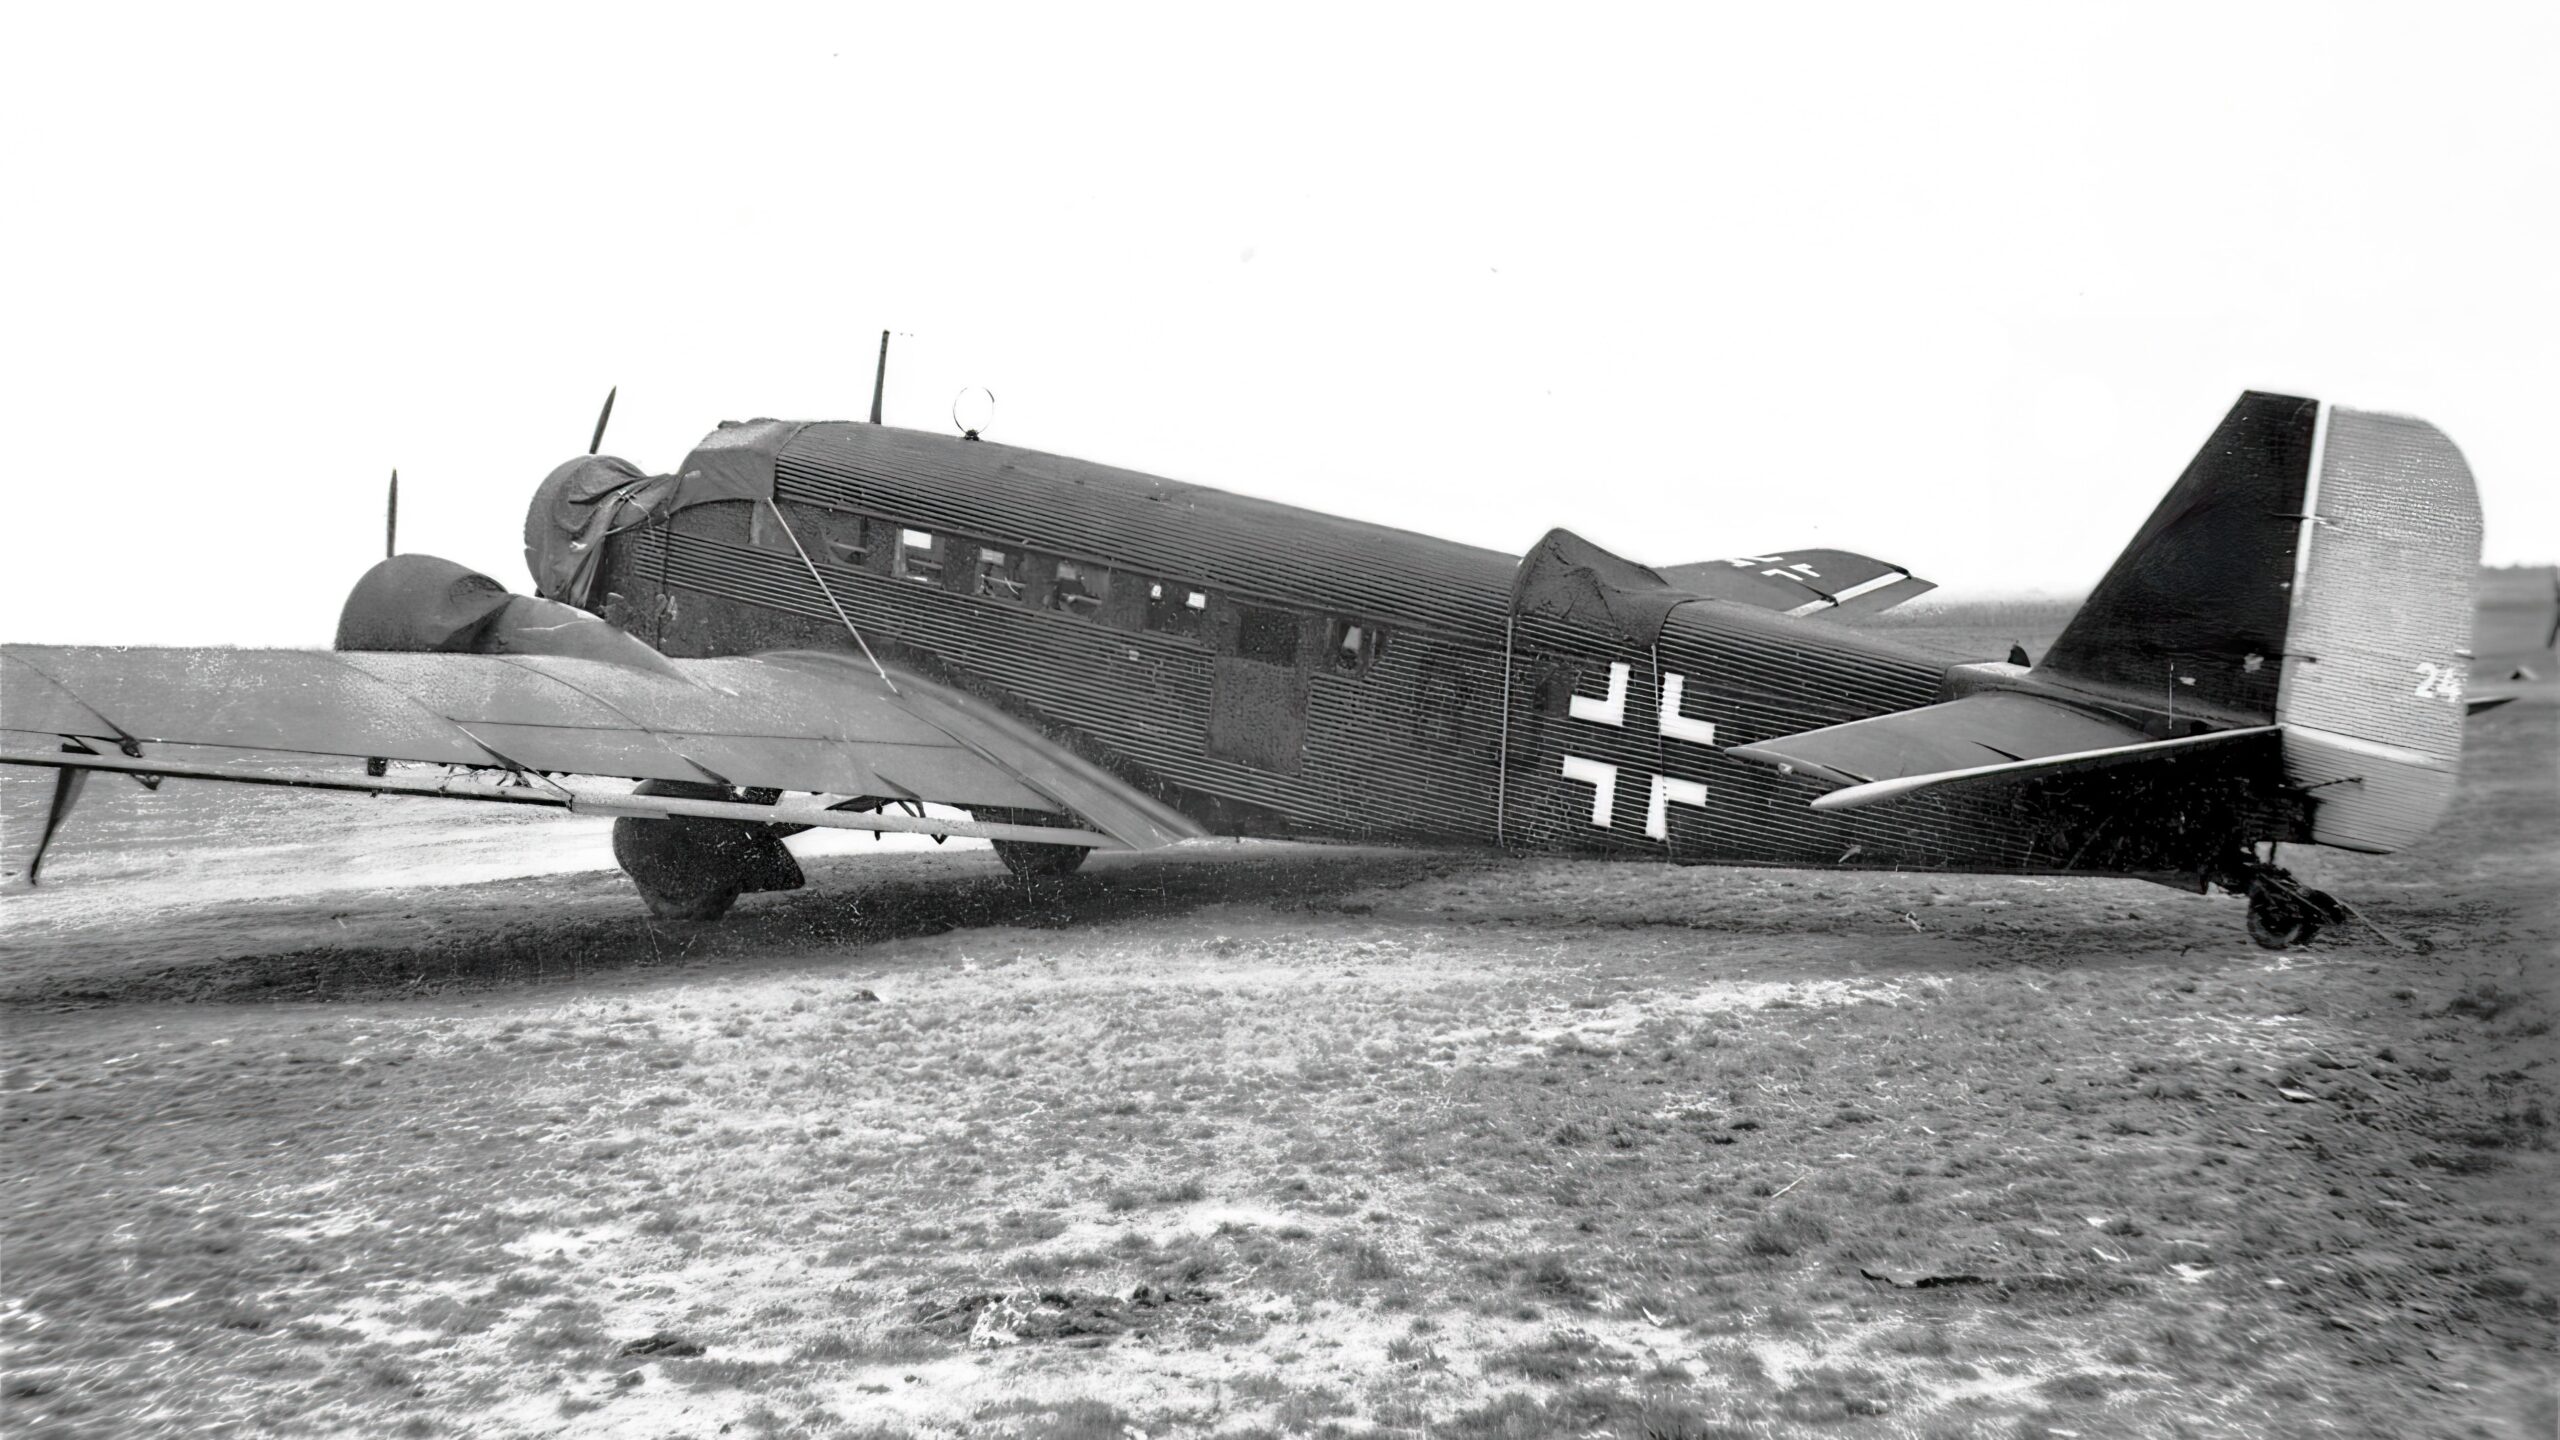 The Ju 52, nicknamed "Tante Ju", could be found during World War II at almost all airfields in Europe and North Africa operated by the German Air Force 